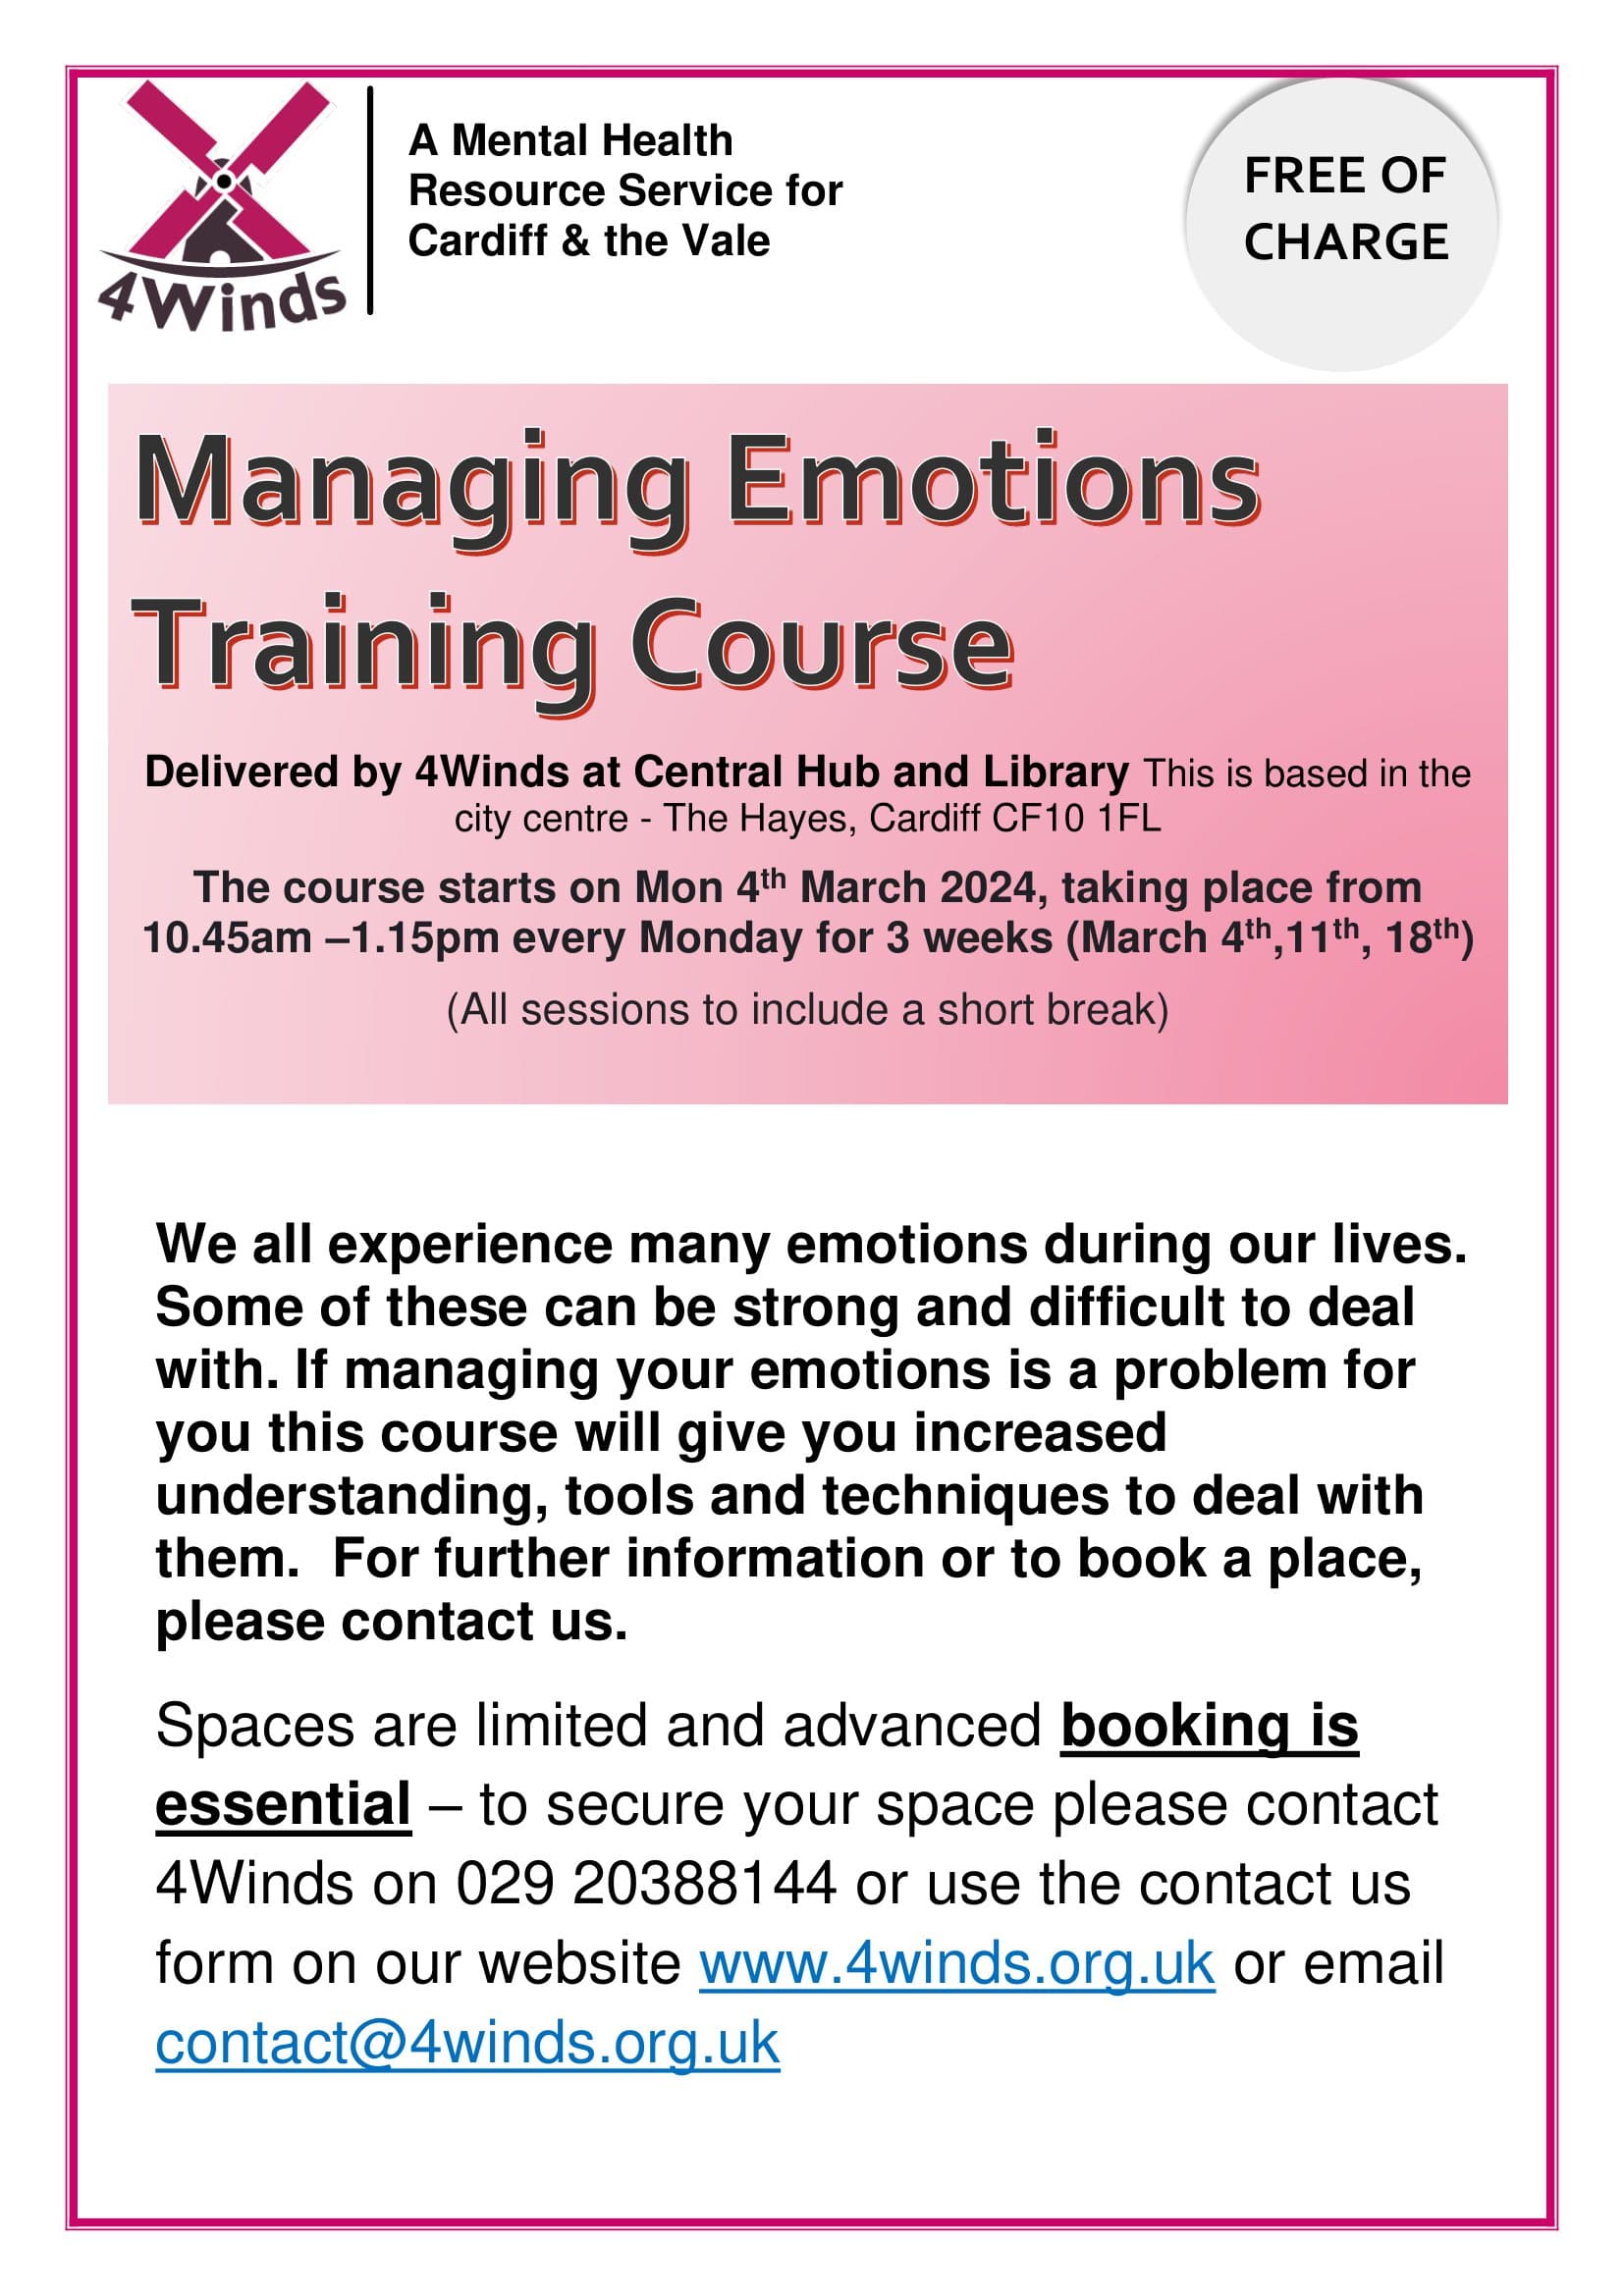 4winds managing your emotions training course mental health